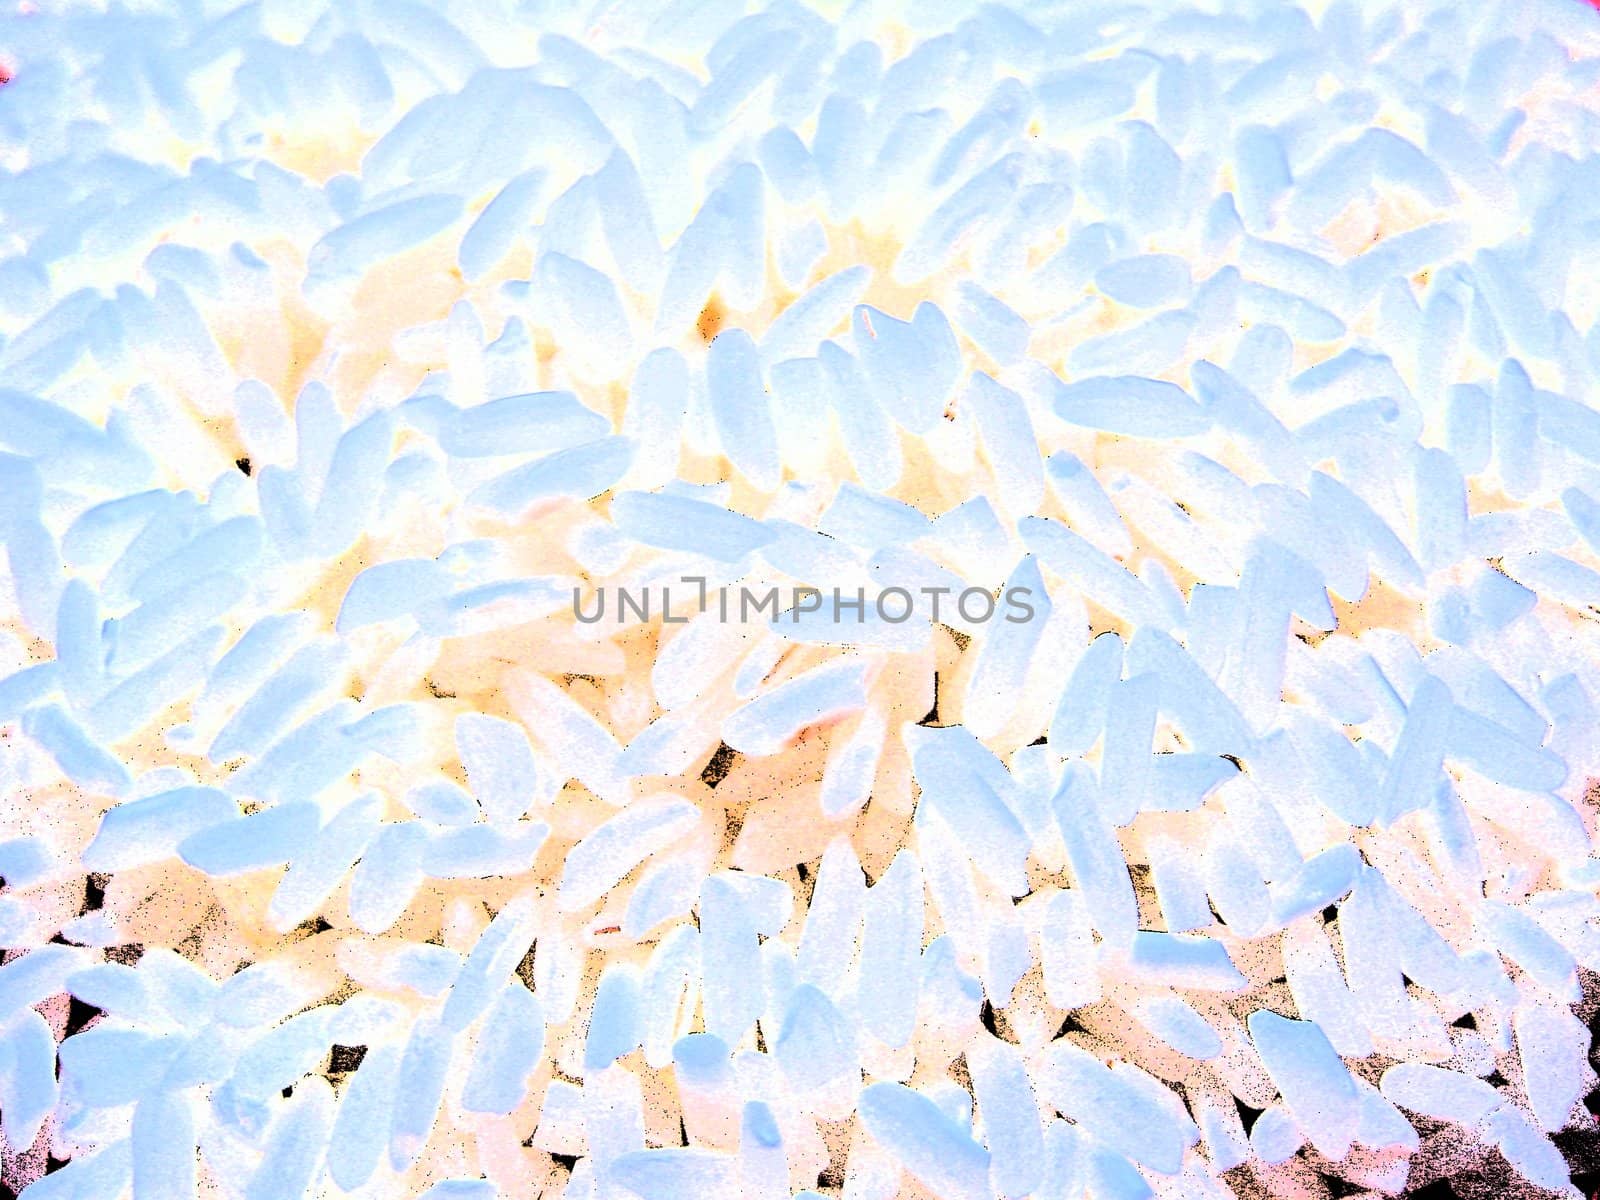 The image on a white background with bacteria